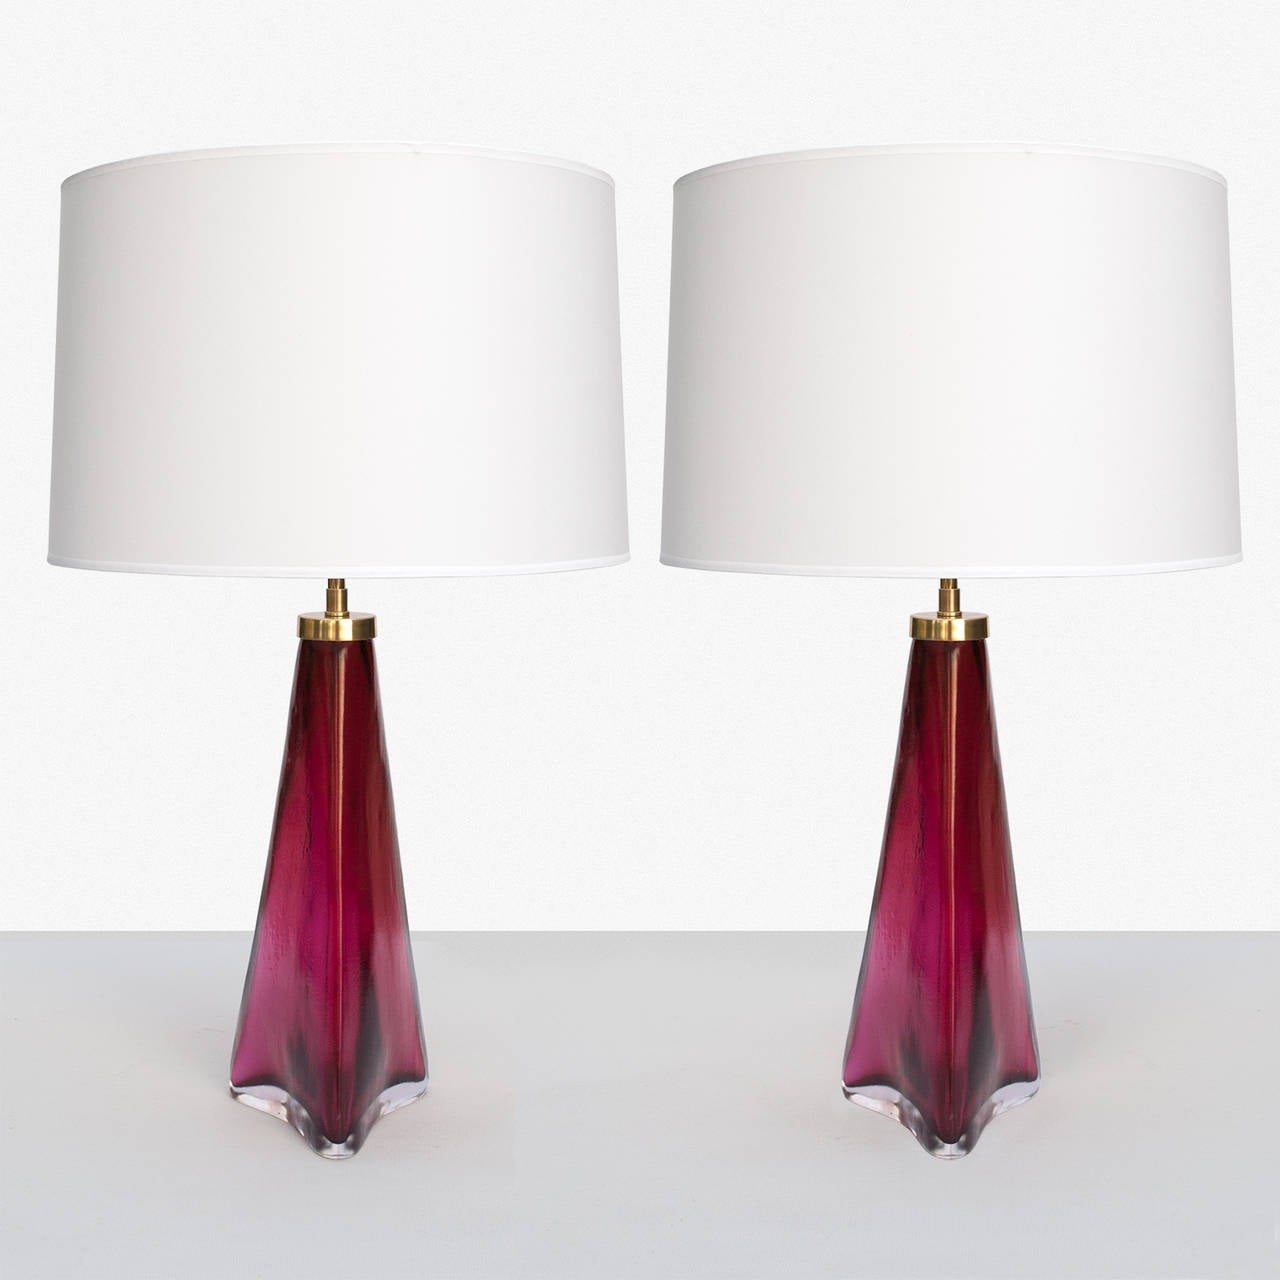 Gorgeous pair of Swedish table lamps in red and clear glass with matt, acid treated finish. Signed Orrefors on the brass cap, lamps retains original paper label. Wired for the US with high-end double cluster socket hardware of polished lacquered